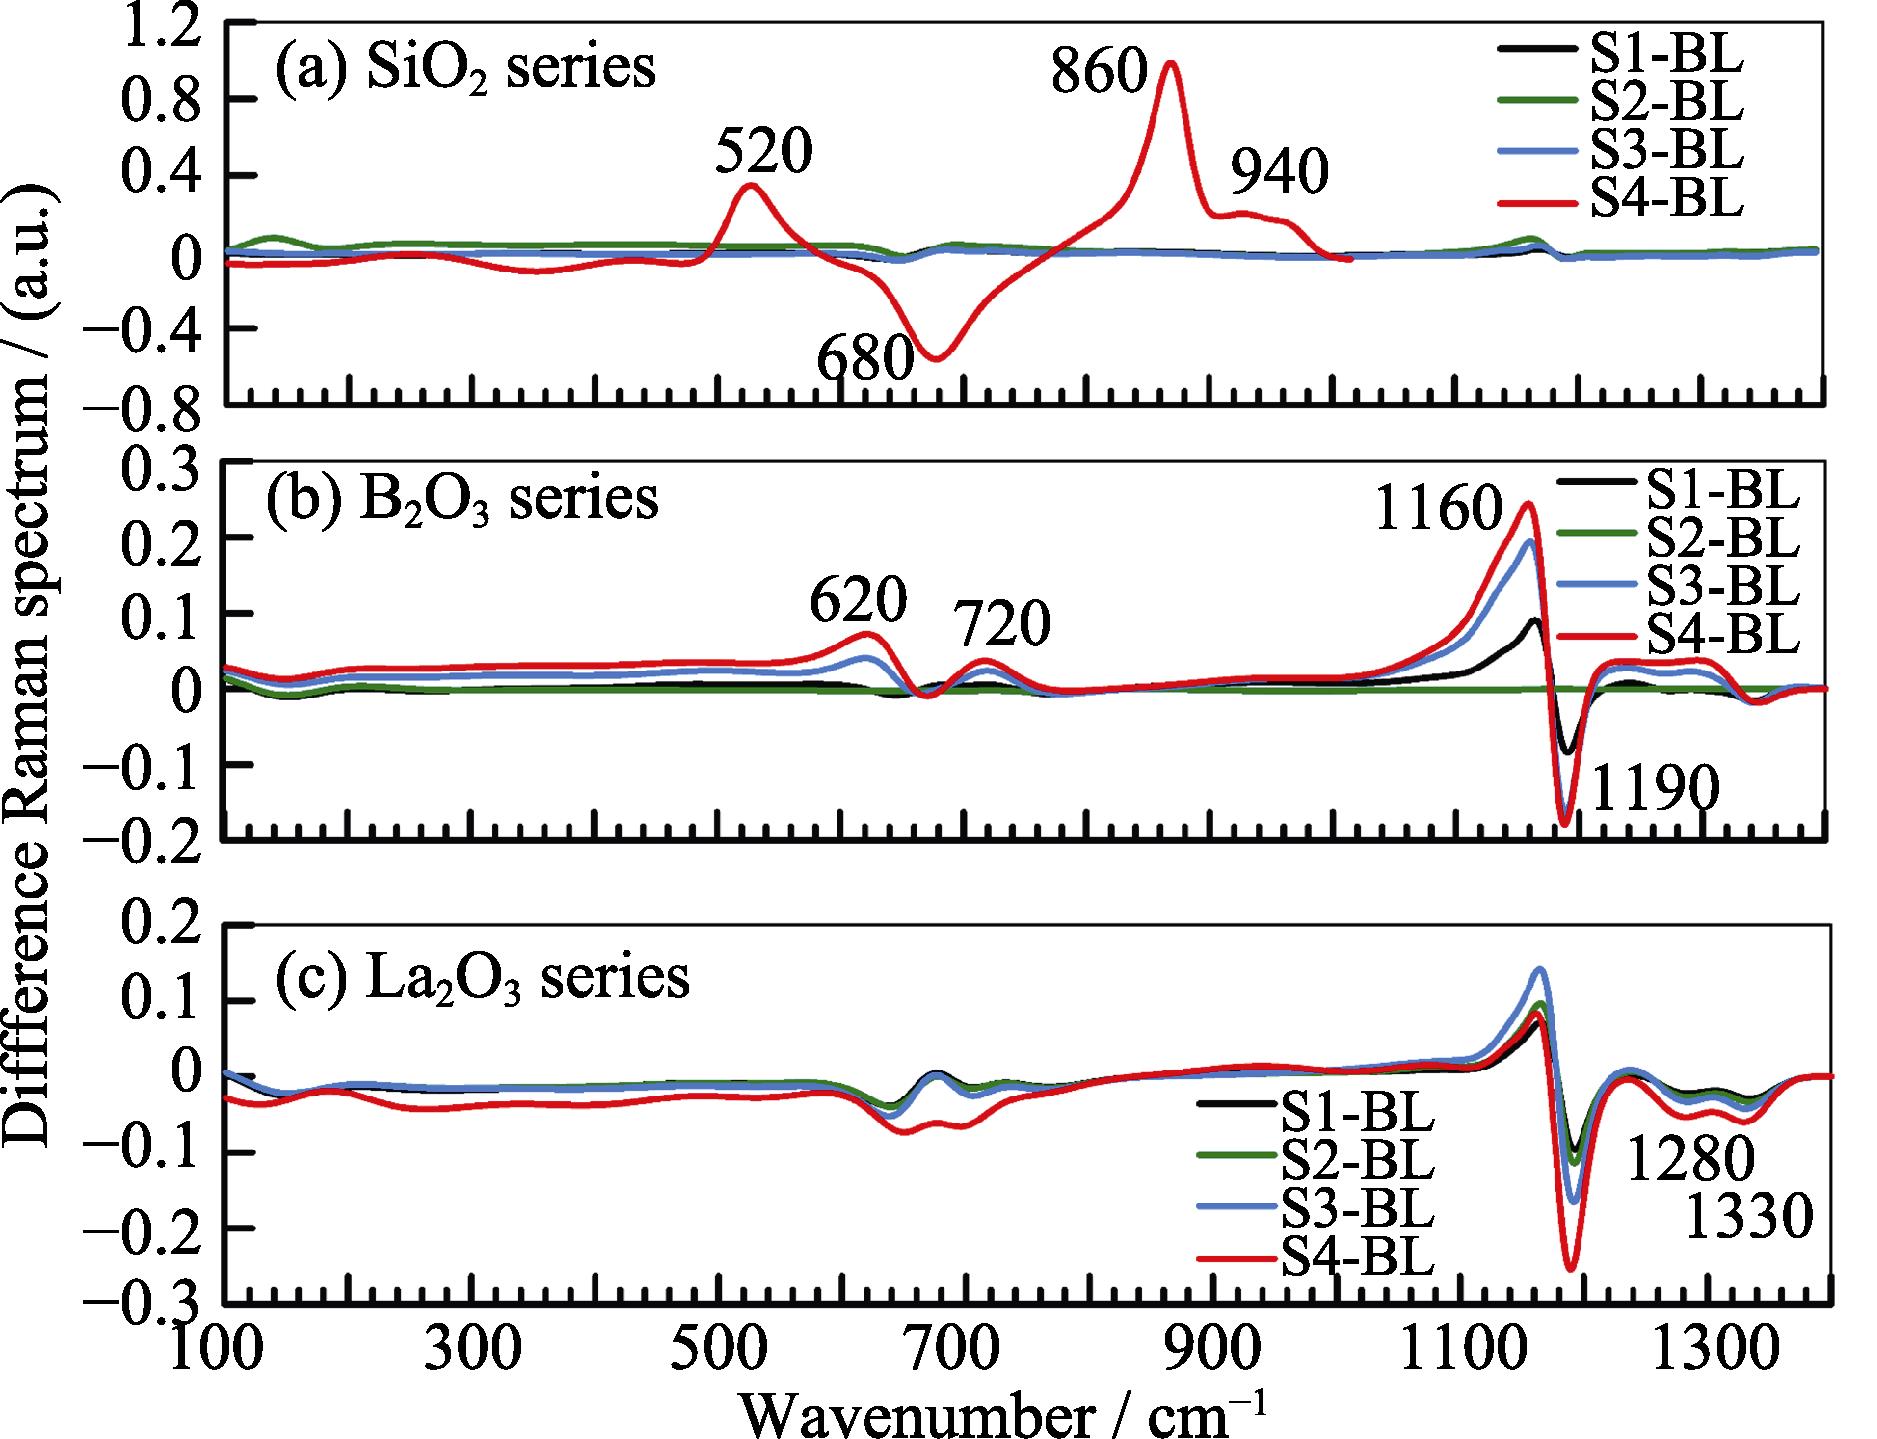 Effect of SiO2、B2O3 and La2O3 on Raman spectra of BL glass